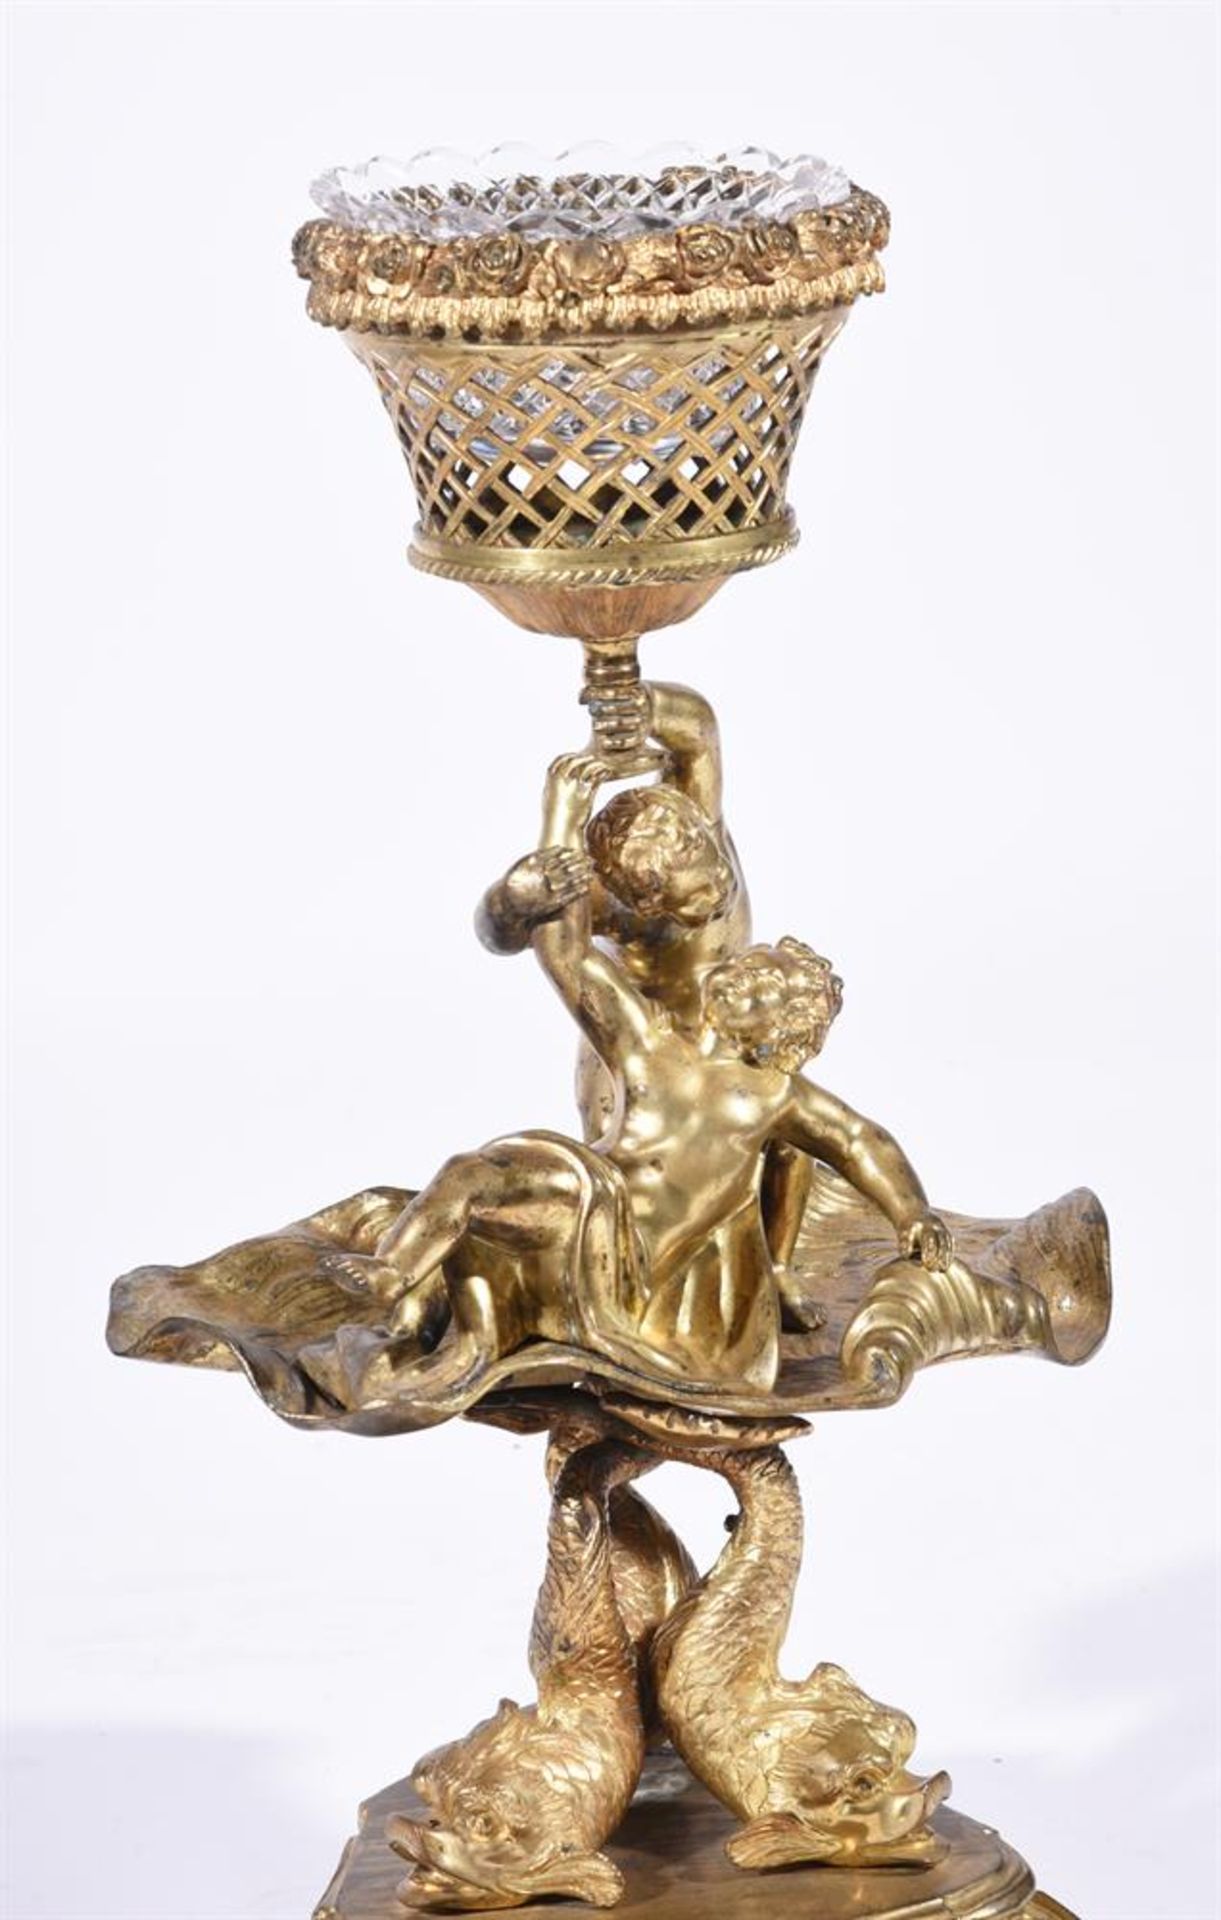 A LARGE ORNATE GILT METAL TABLE CENTREPIECE, LATE 18TH CENTURY AND LATER - Image 2 of 4